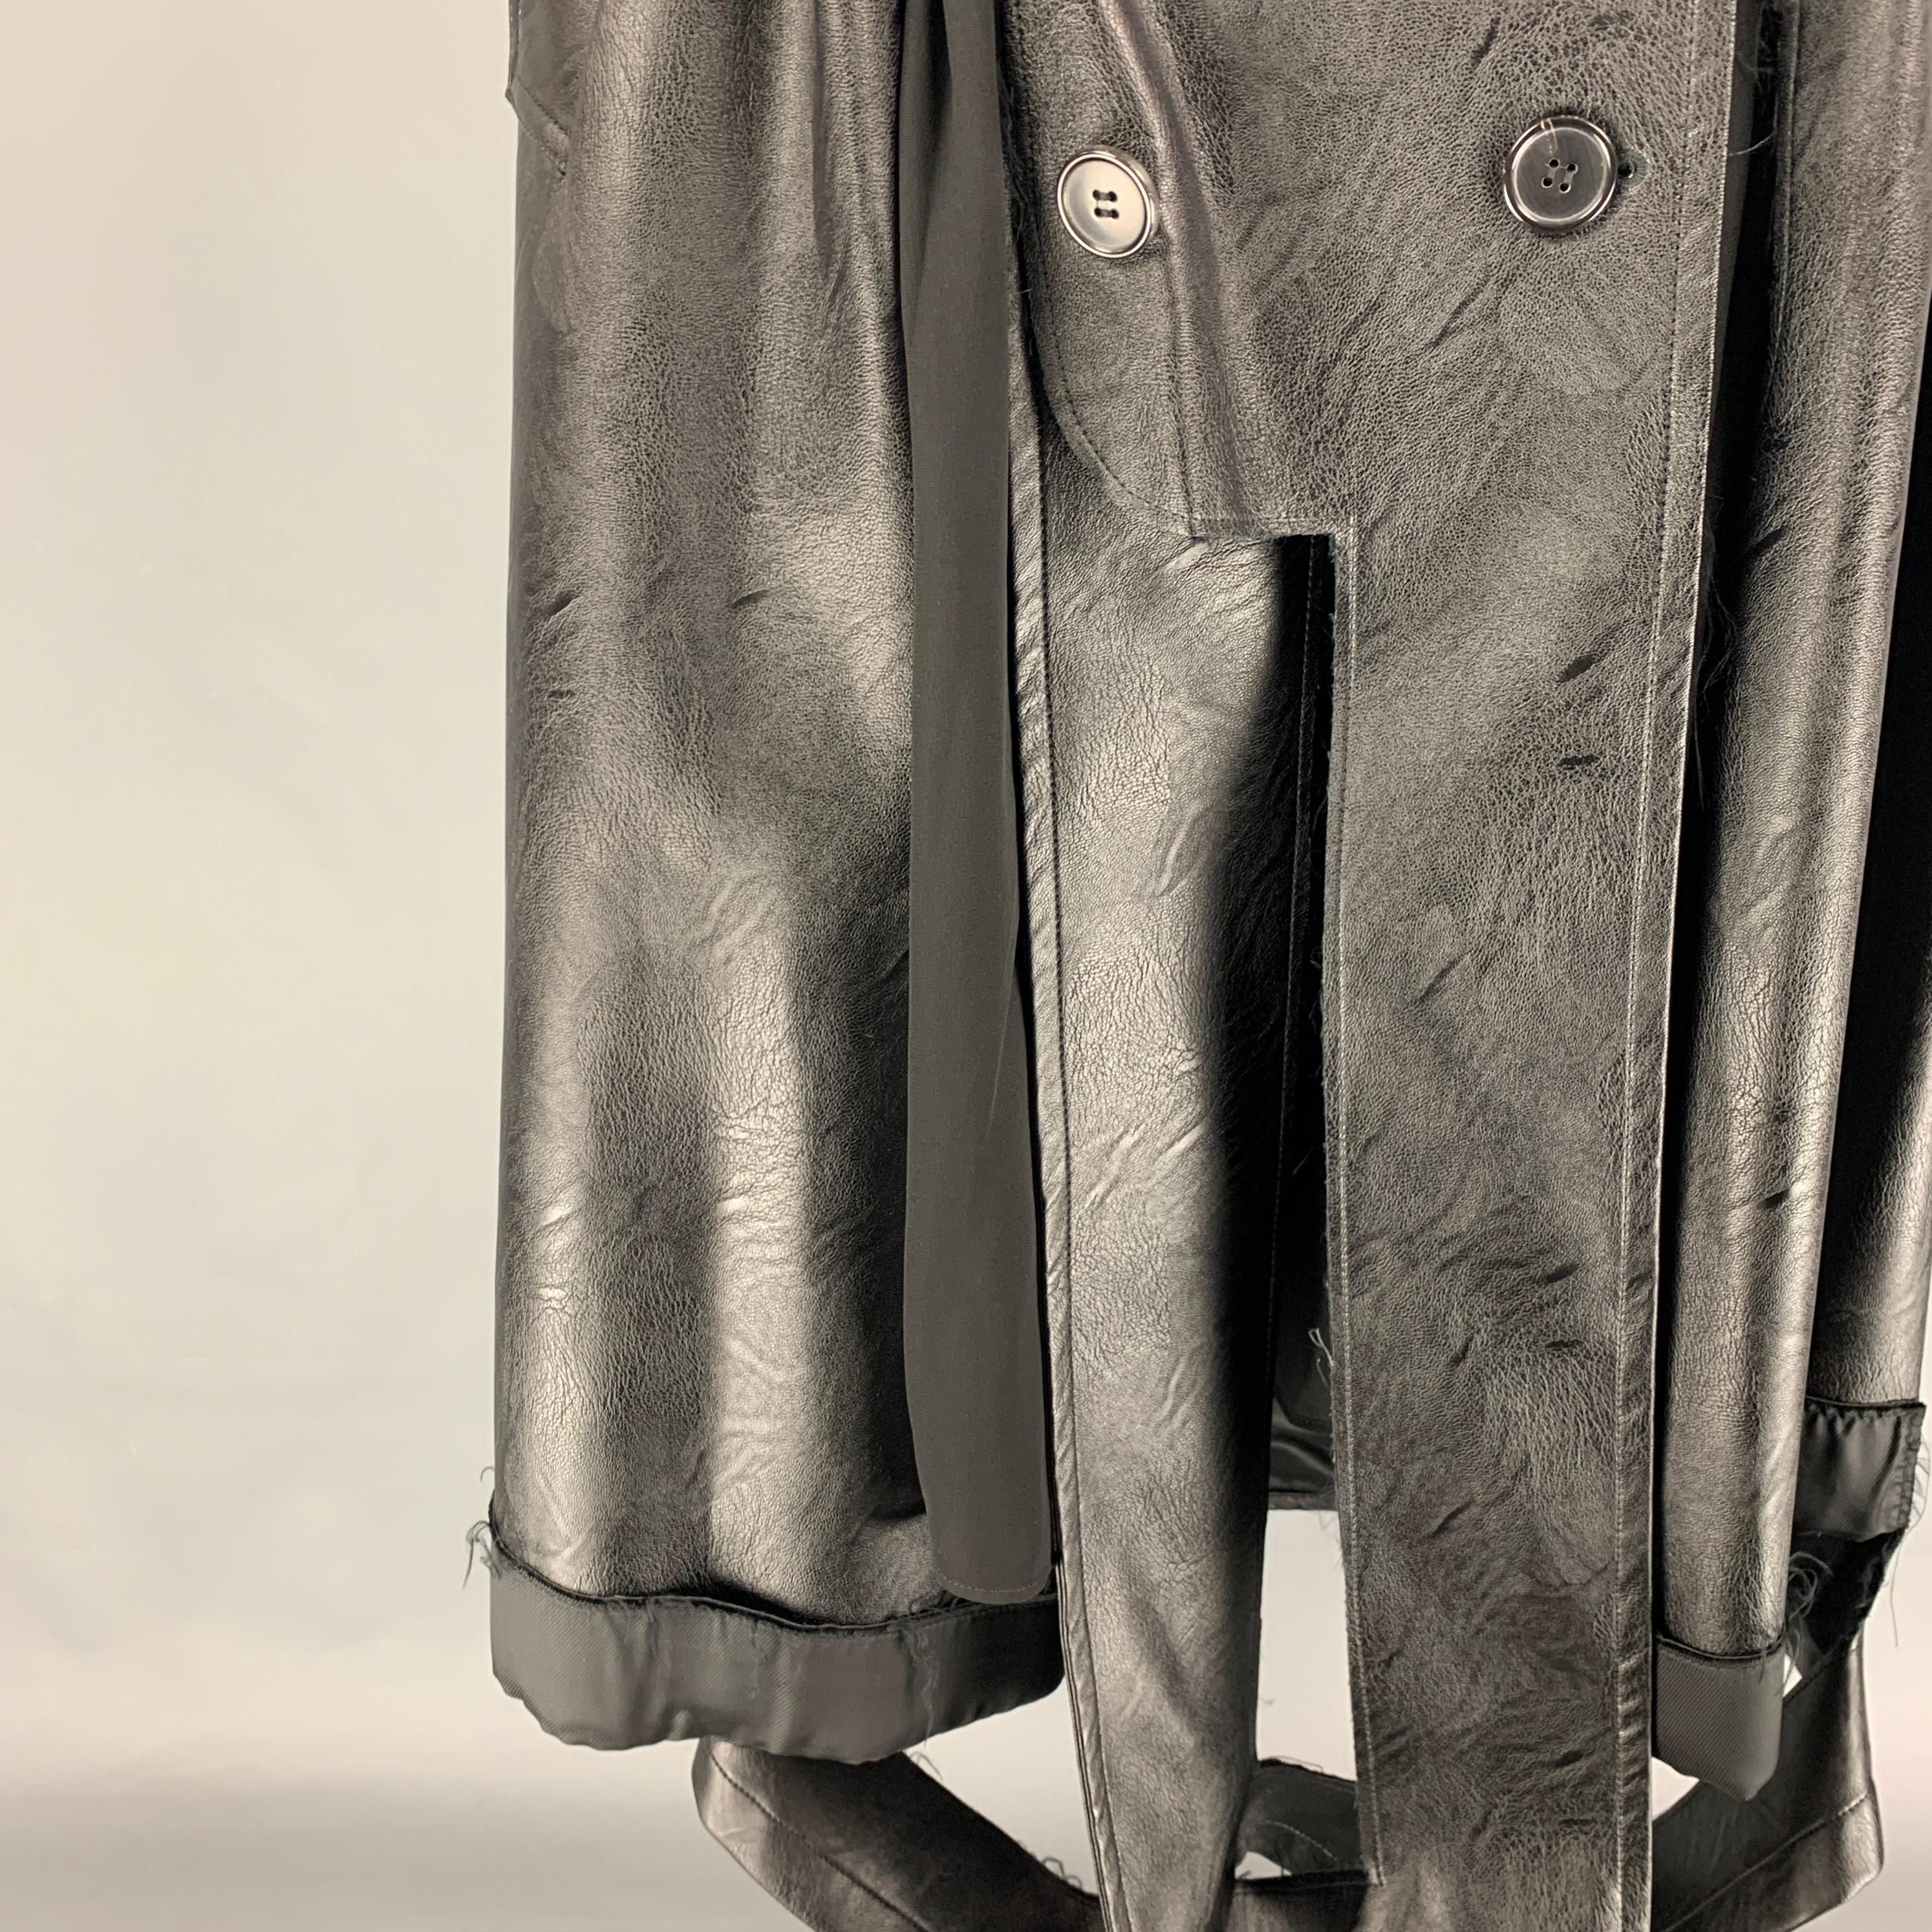 MAISON MARGIELA  Fall Winter 2019 by John Galliano pants comes in black viscose with a chiffon lining featuring a deconstructed lapel design, wide leg, belted, snap button details, and a double breasted closure. Made in Italy. 

Very Good Pre-Owned